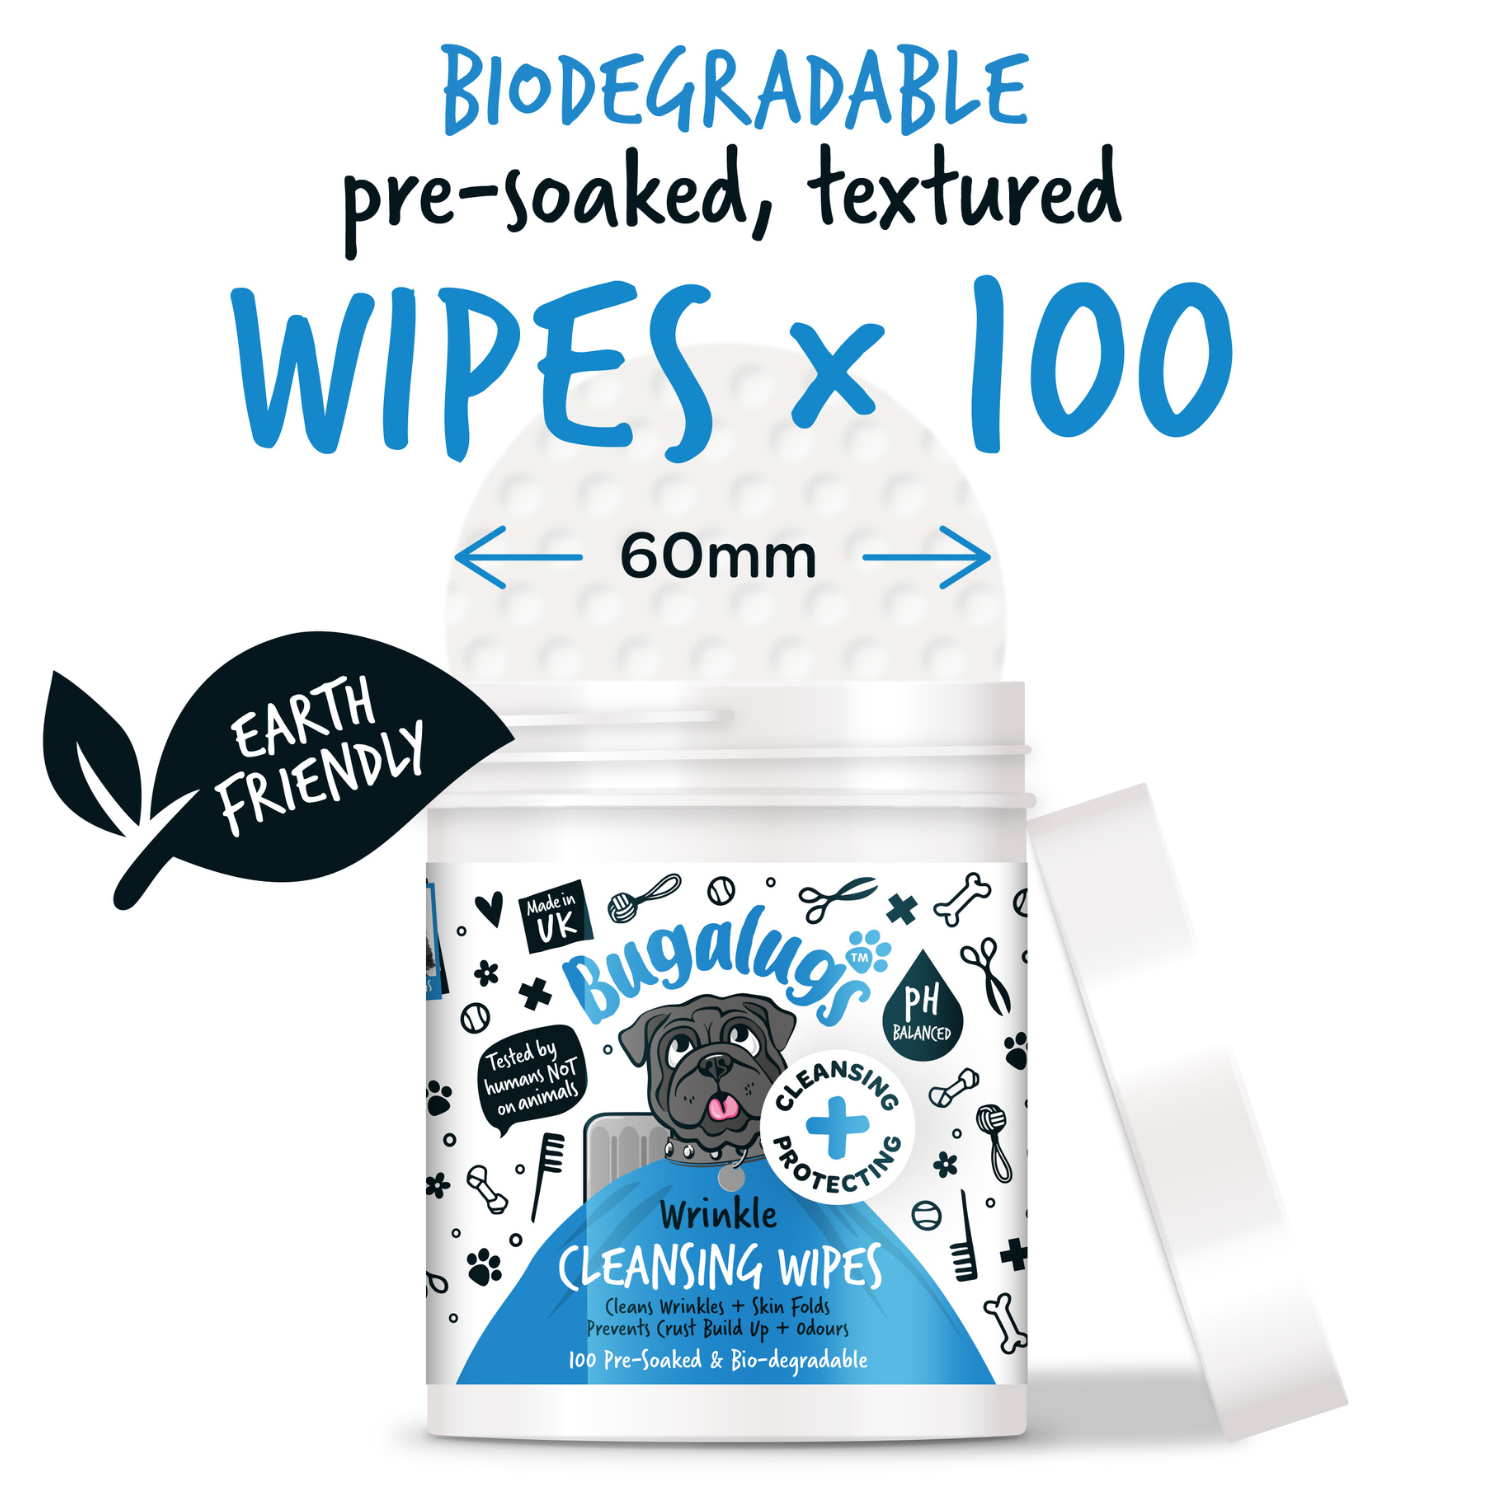 Bugalugs Wrinkle Cleansing Wipes - Biodegradable, pre-soaked, textured wipes x100